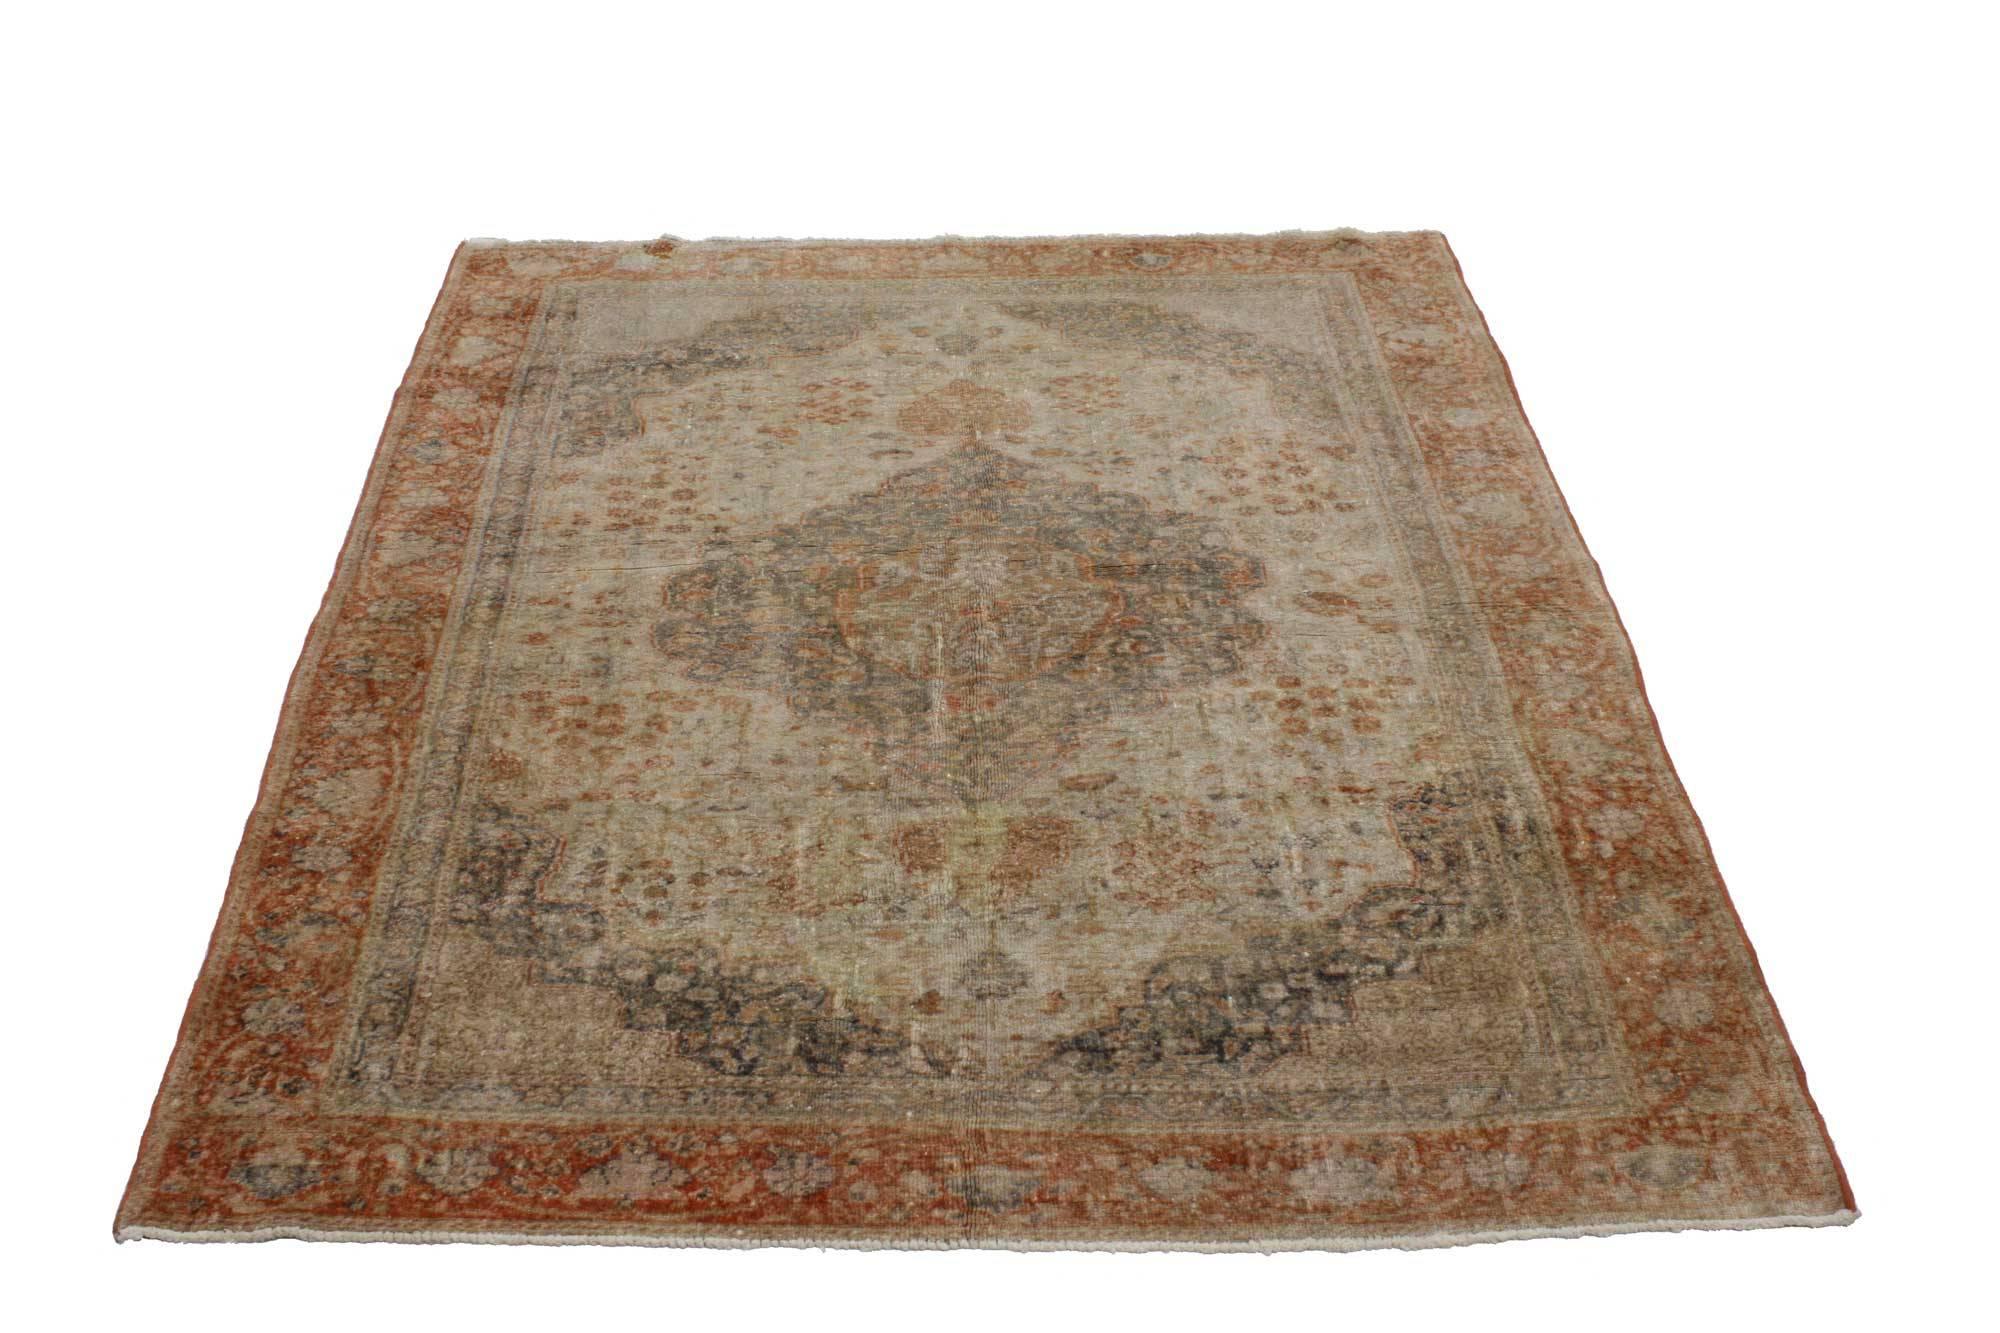 51700 distressed vintage Oushak rug with medallion and corner motif. This vintage Turkish rug features an intricate floral medallion resting on a large lozenge that coordinates with the spandrels. The Oushak accent rug is bordered in a band of wine